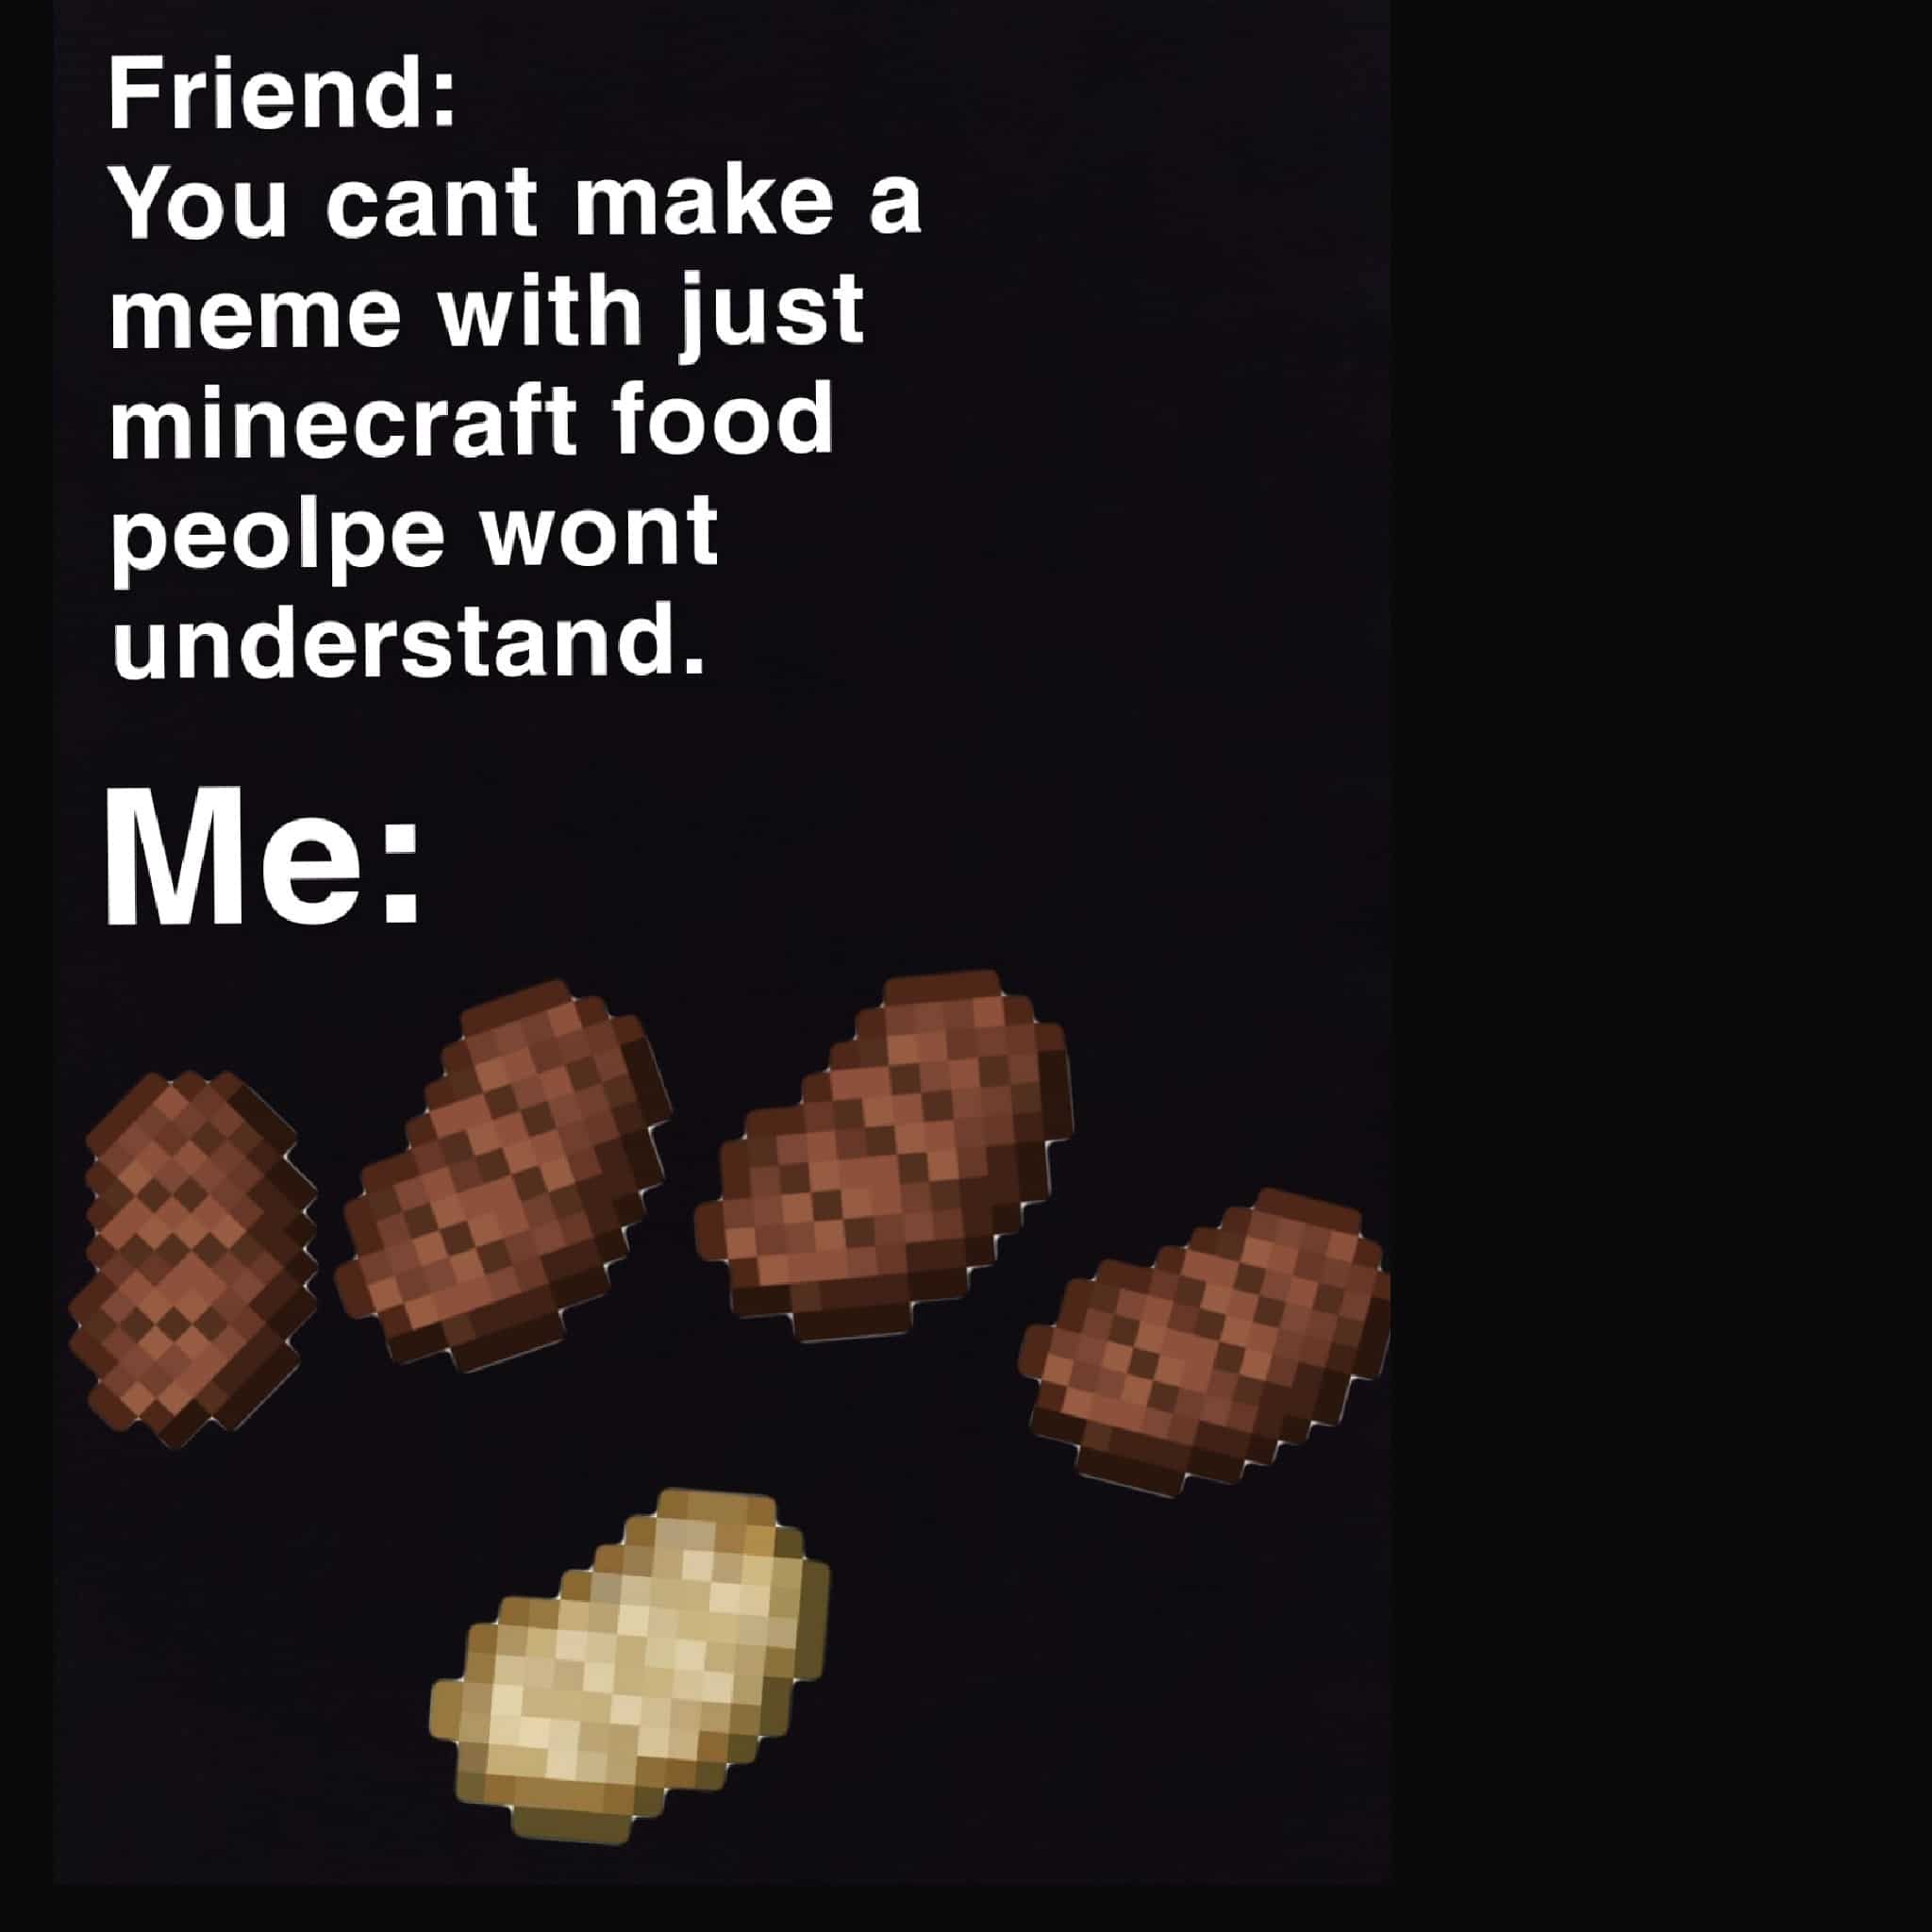 minecraft minecraft-memes minecraft text: Friend: You cant make a meme with just minecraft food peolpe wont understand. 